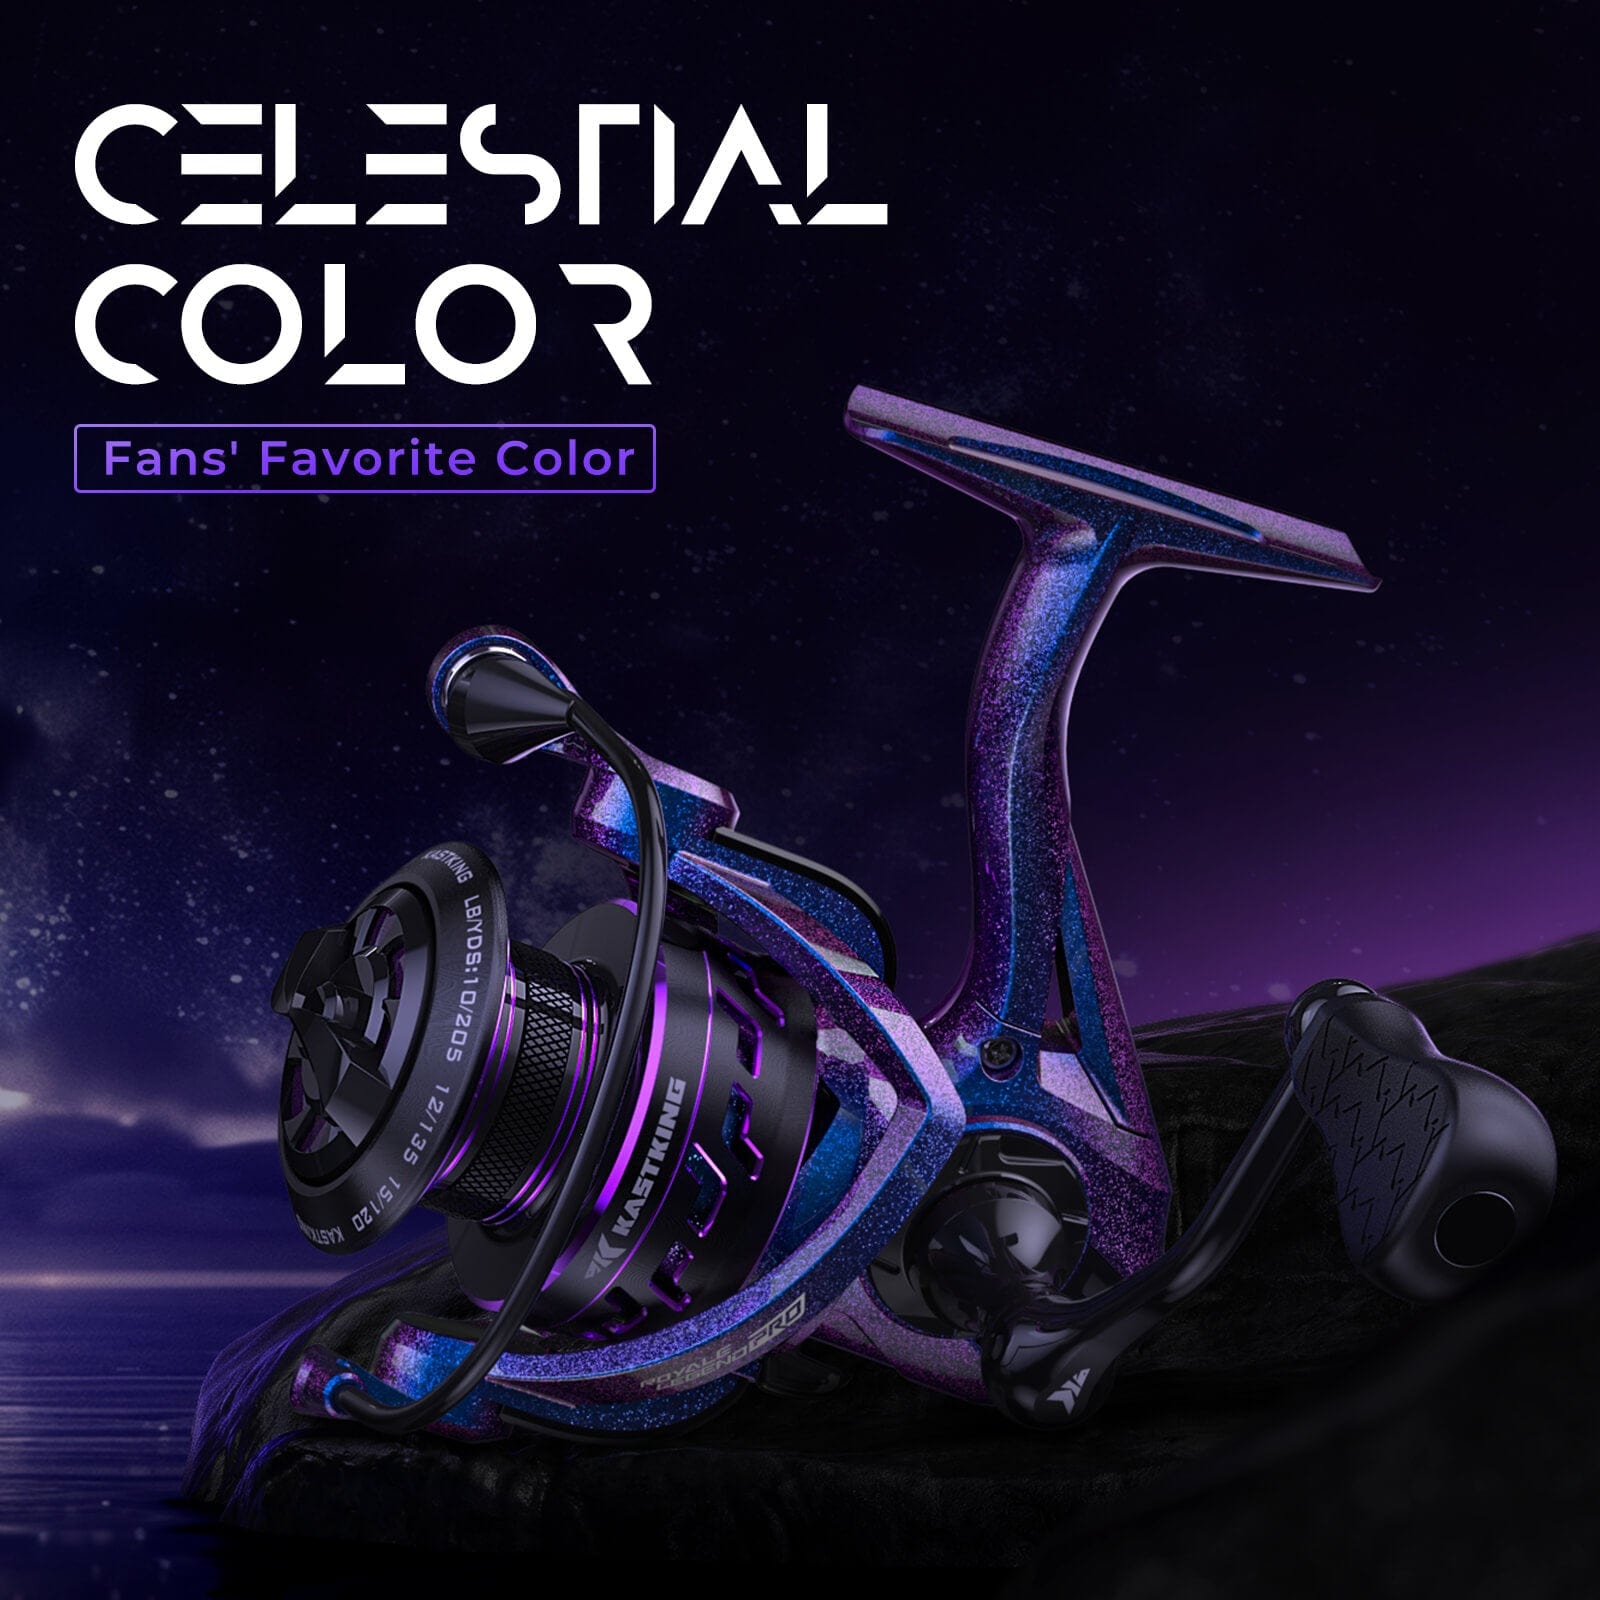 New KastKing Fishing Reel Adds Colorful Style to Spinning Reel